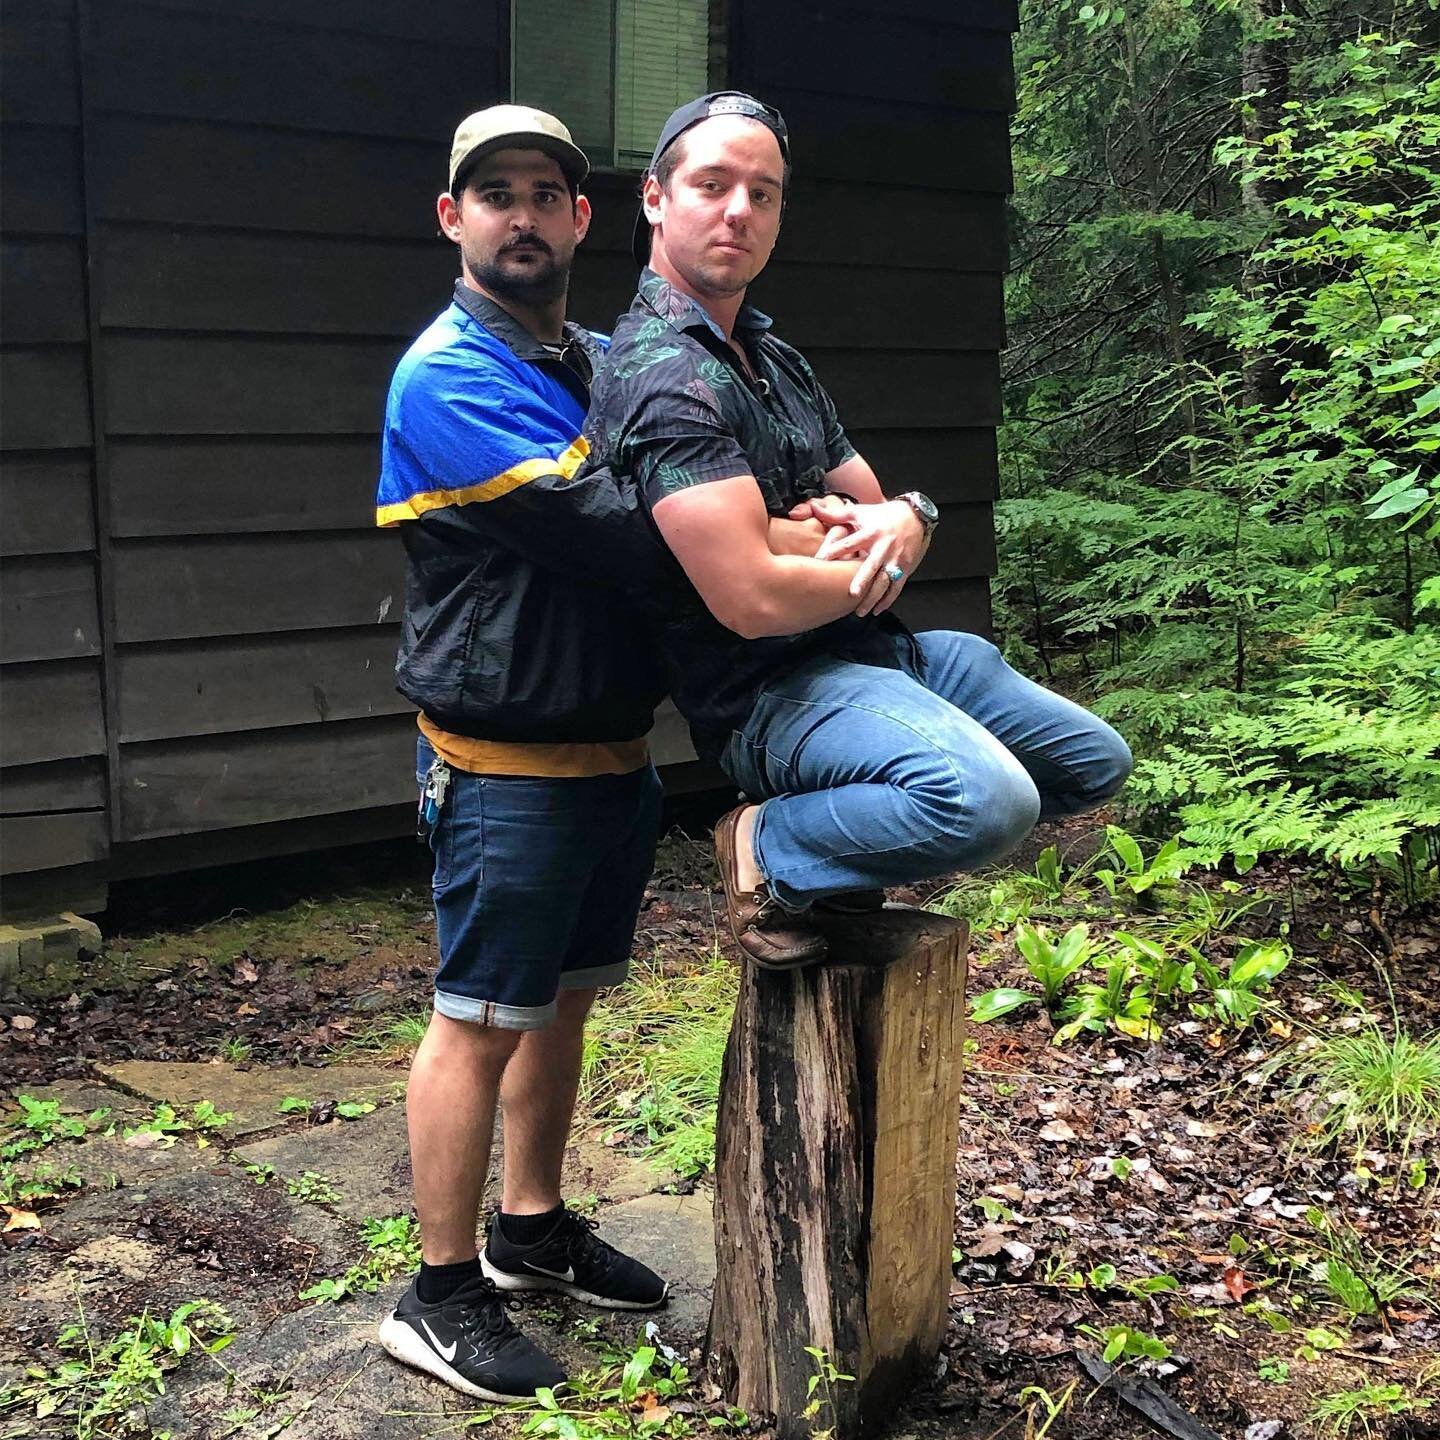 HEY FRIENDS!

Check out this sweet cottage picture of us hugging on a log!

AHA now that I have your attention @thevla27 and I were featured on an episode of @stageworthypod with @philrickaby. We had such a good time chatting with Phil and would love